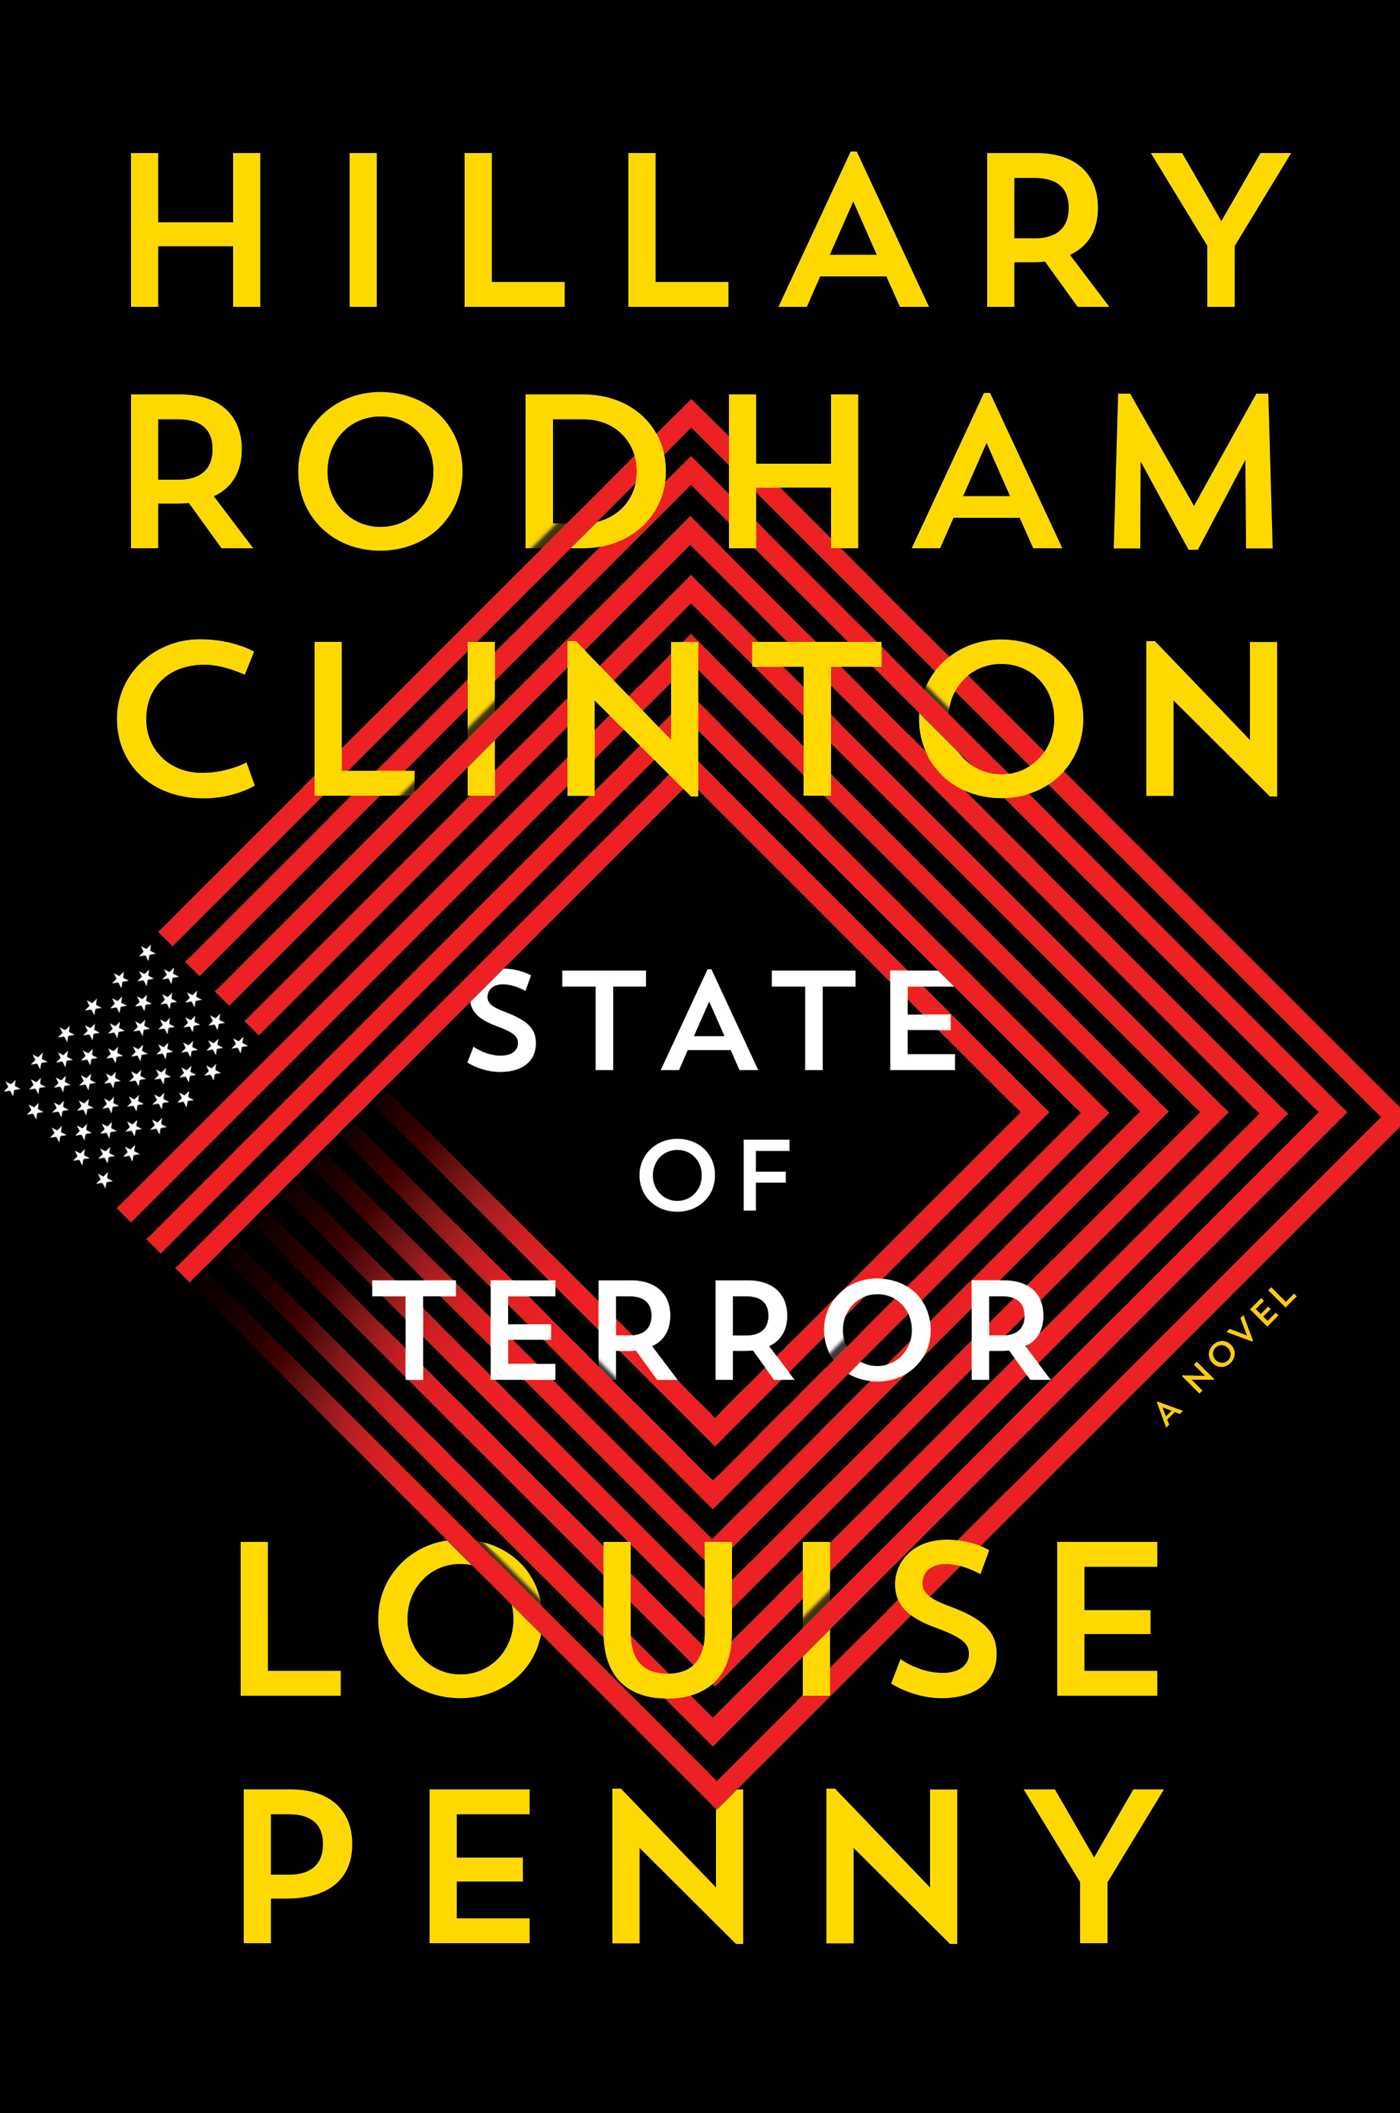 Live & In Conversation: Louise Penny & Hillary Rodham Clinton